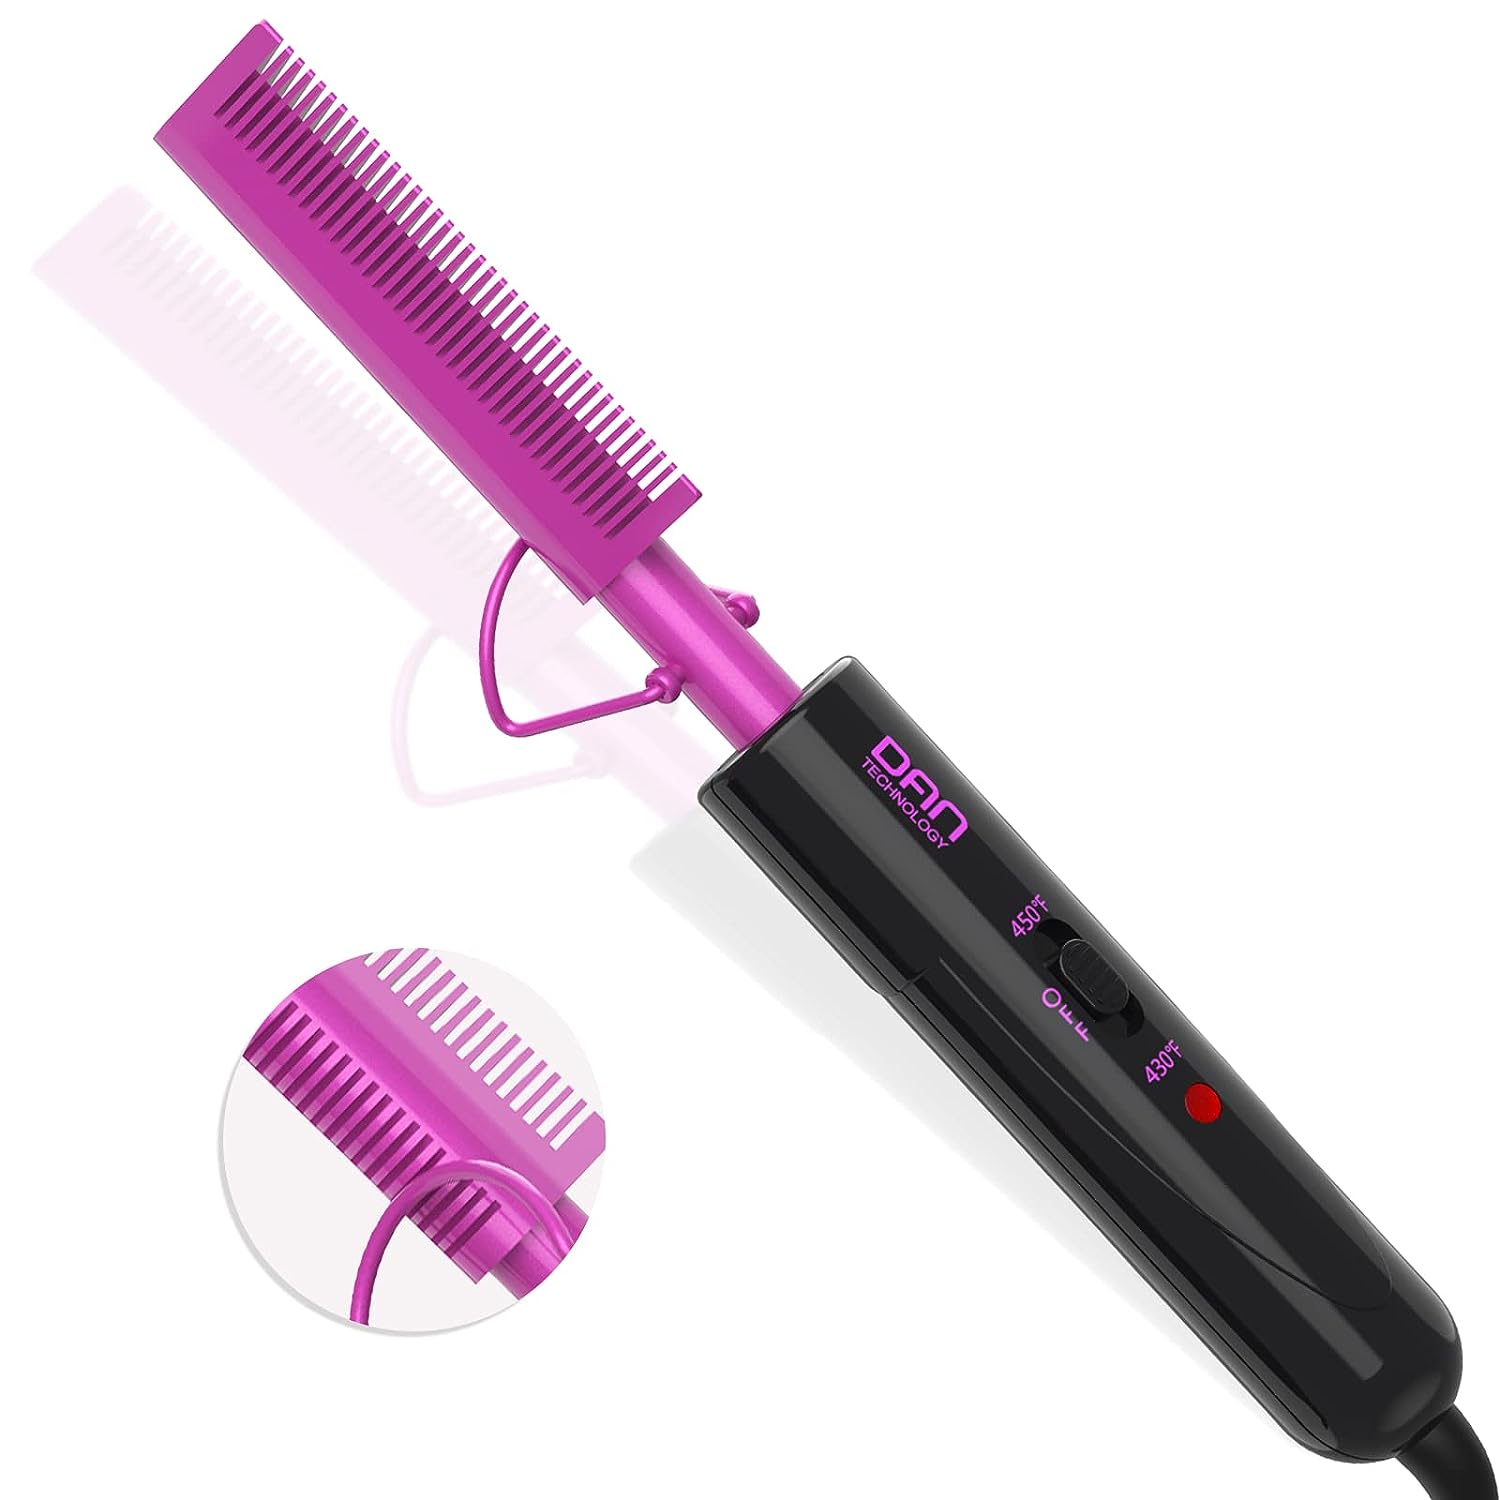 2 in 1 Hot Comb Hair Straightener for Wigs, Black Hair [...]